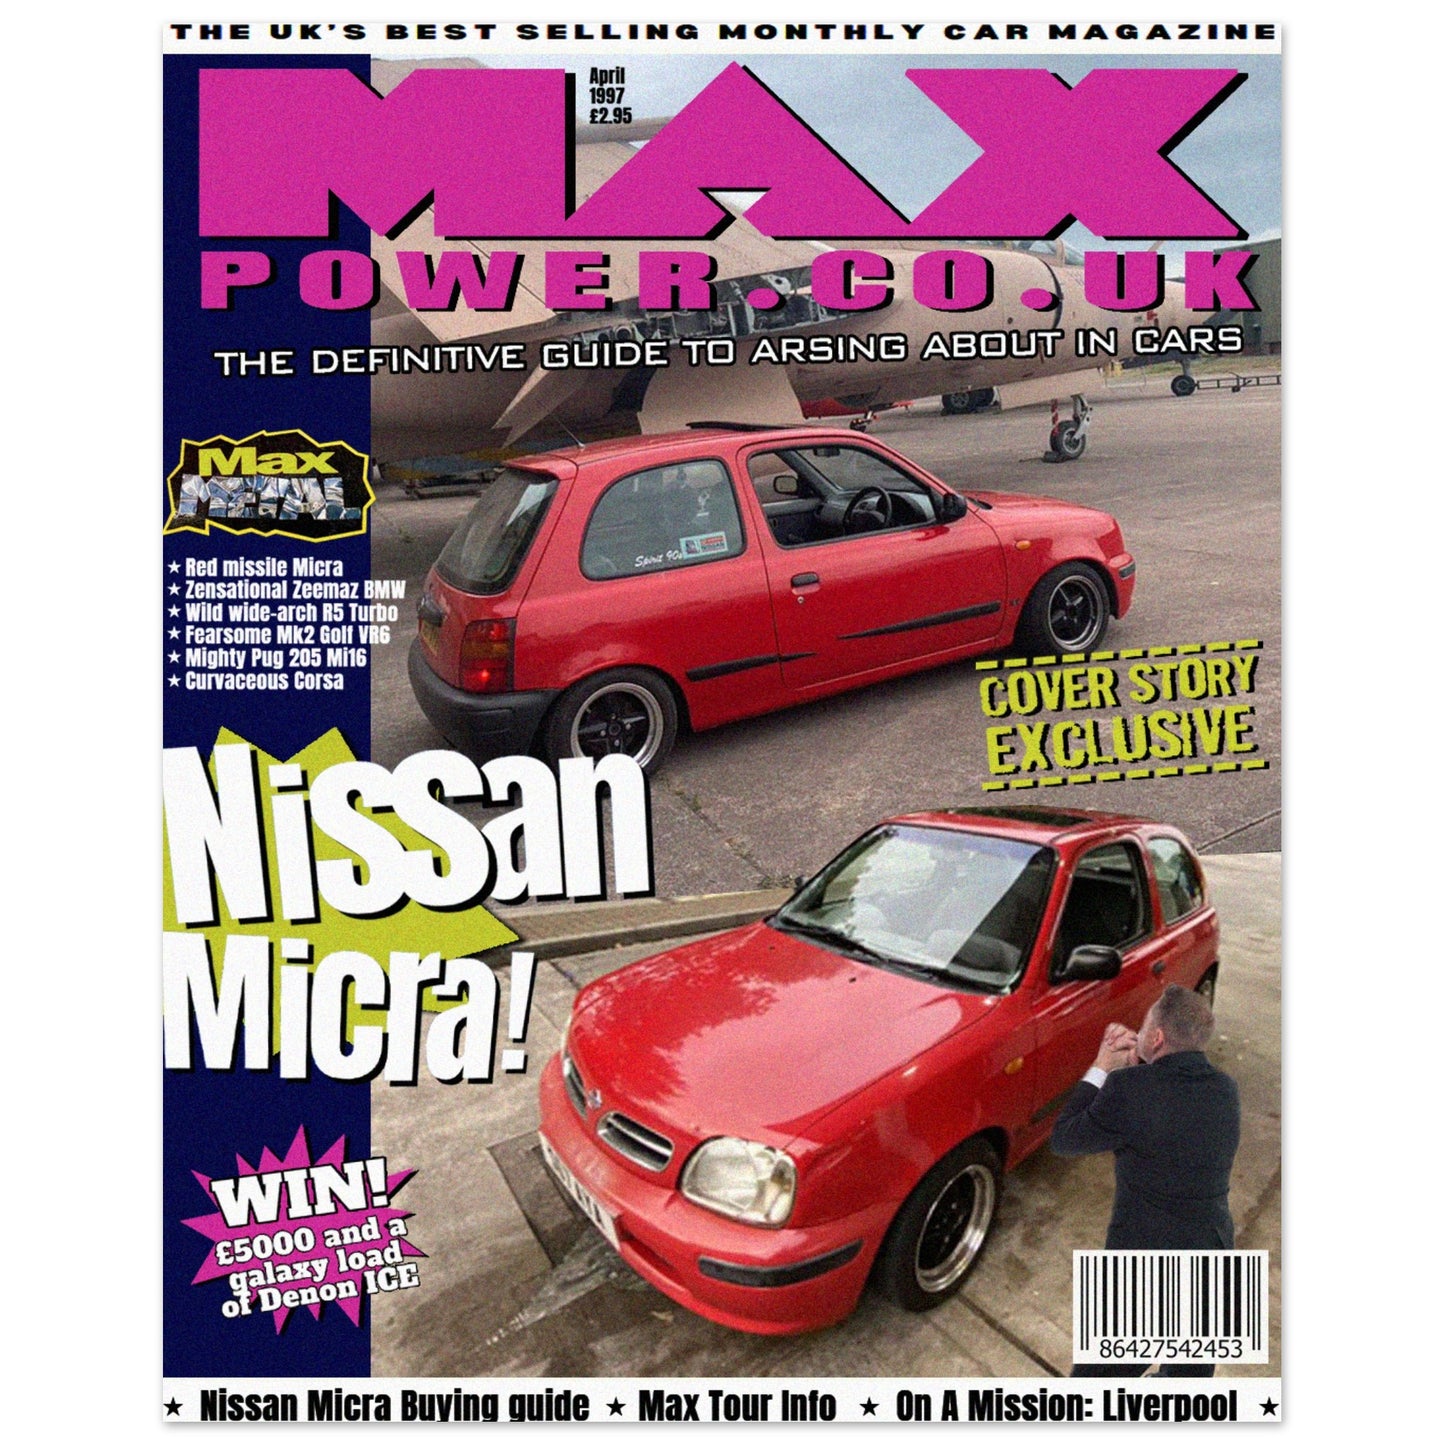 Red Micra Poster